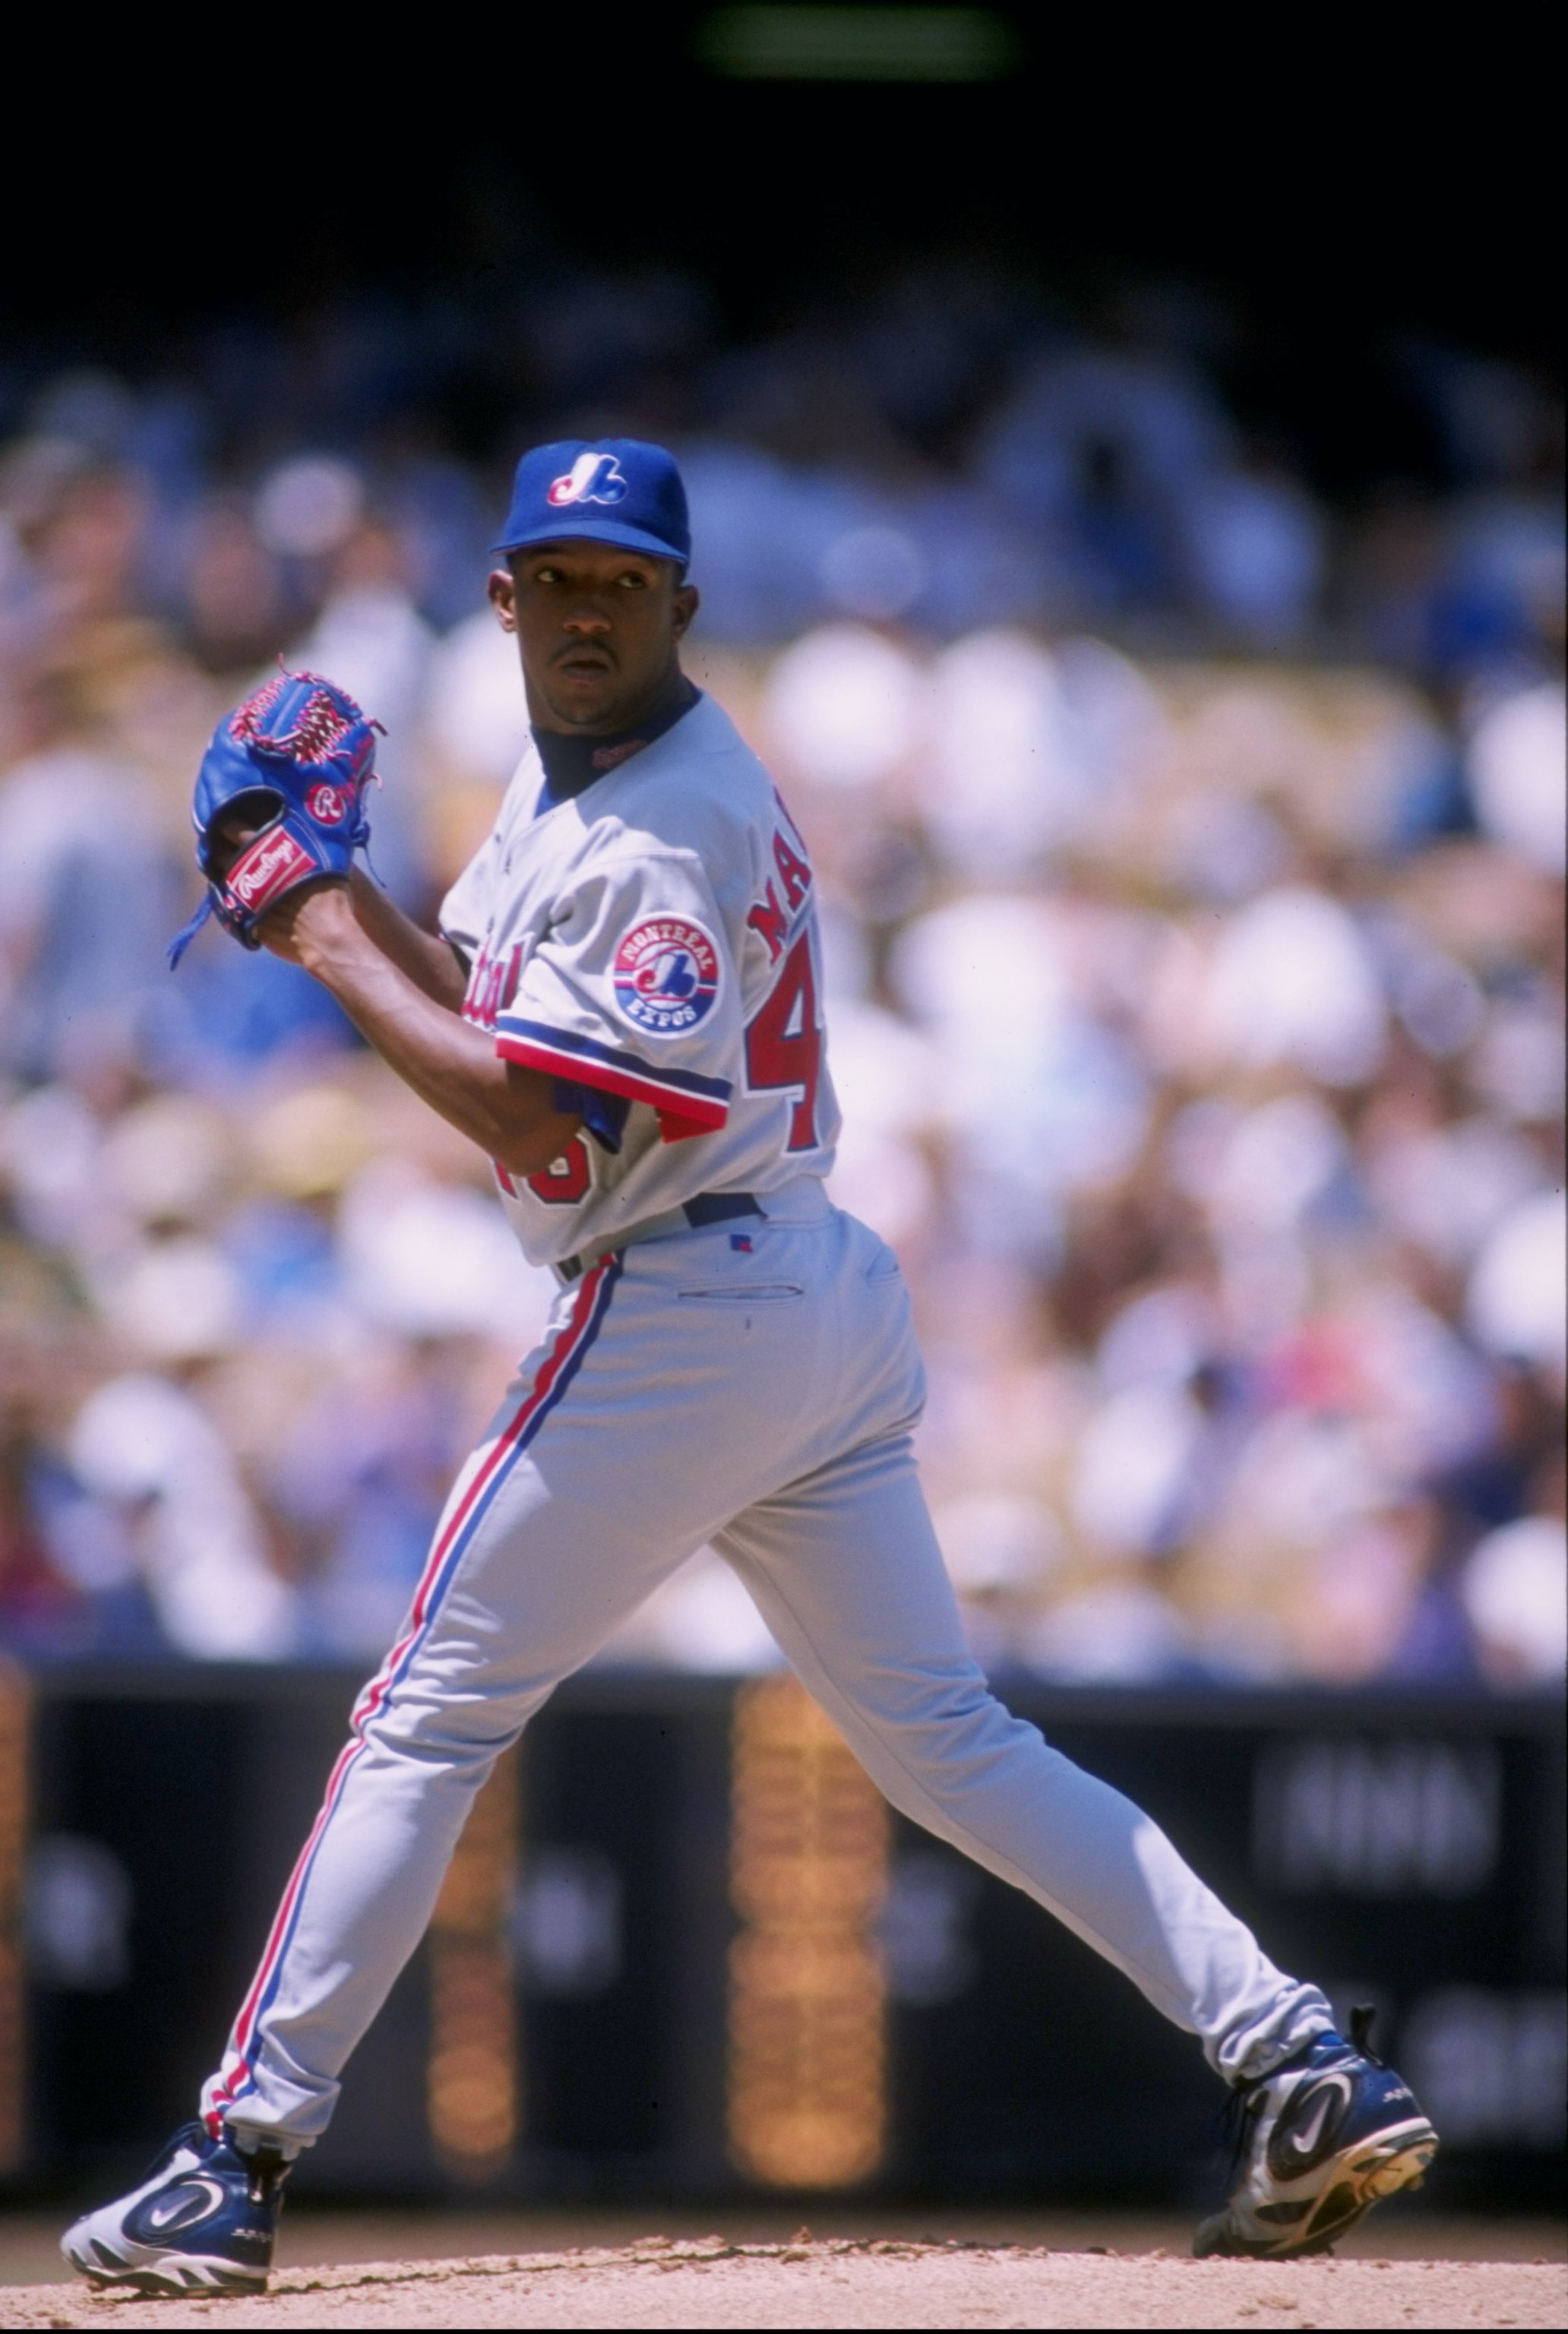 14 Aug 1997: Pitcher Pedro Martinez of the Montreal Expos winds up to throw a pitch during the Expos 1-0 loss to the Los Angeles Dodgers at Dodger Stadium in Los Angeles, California